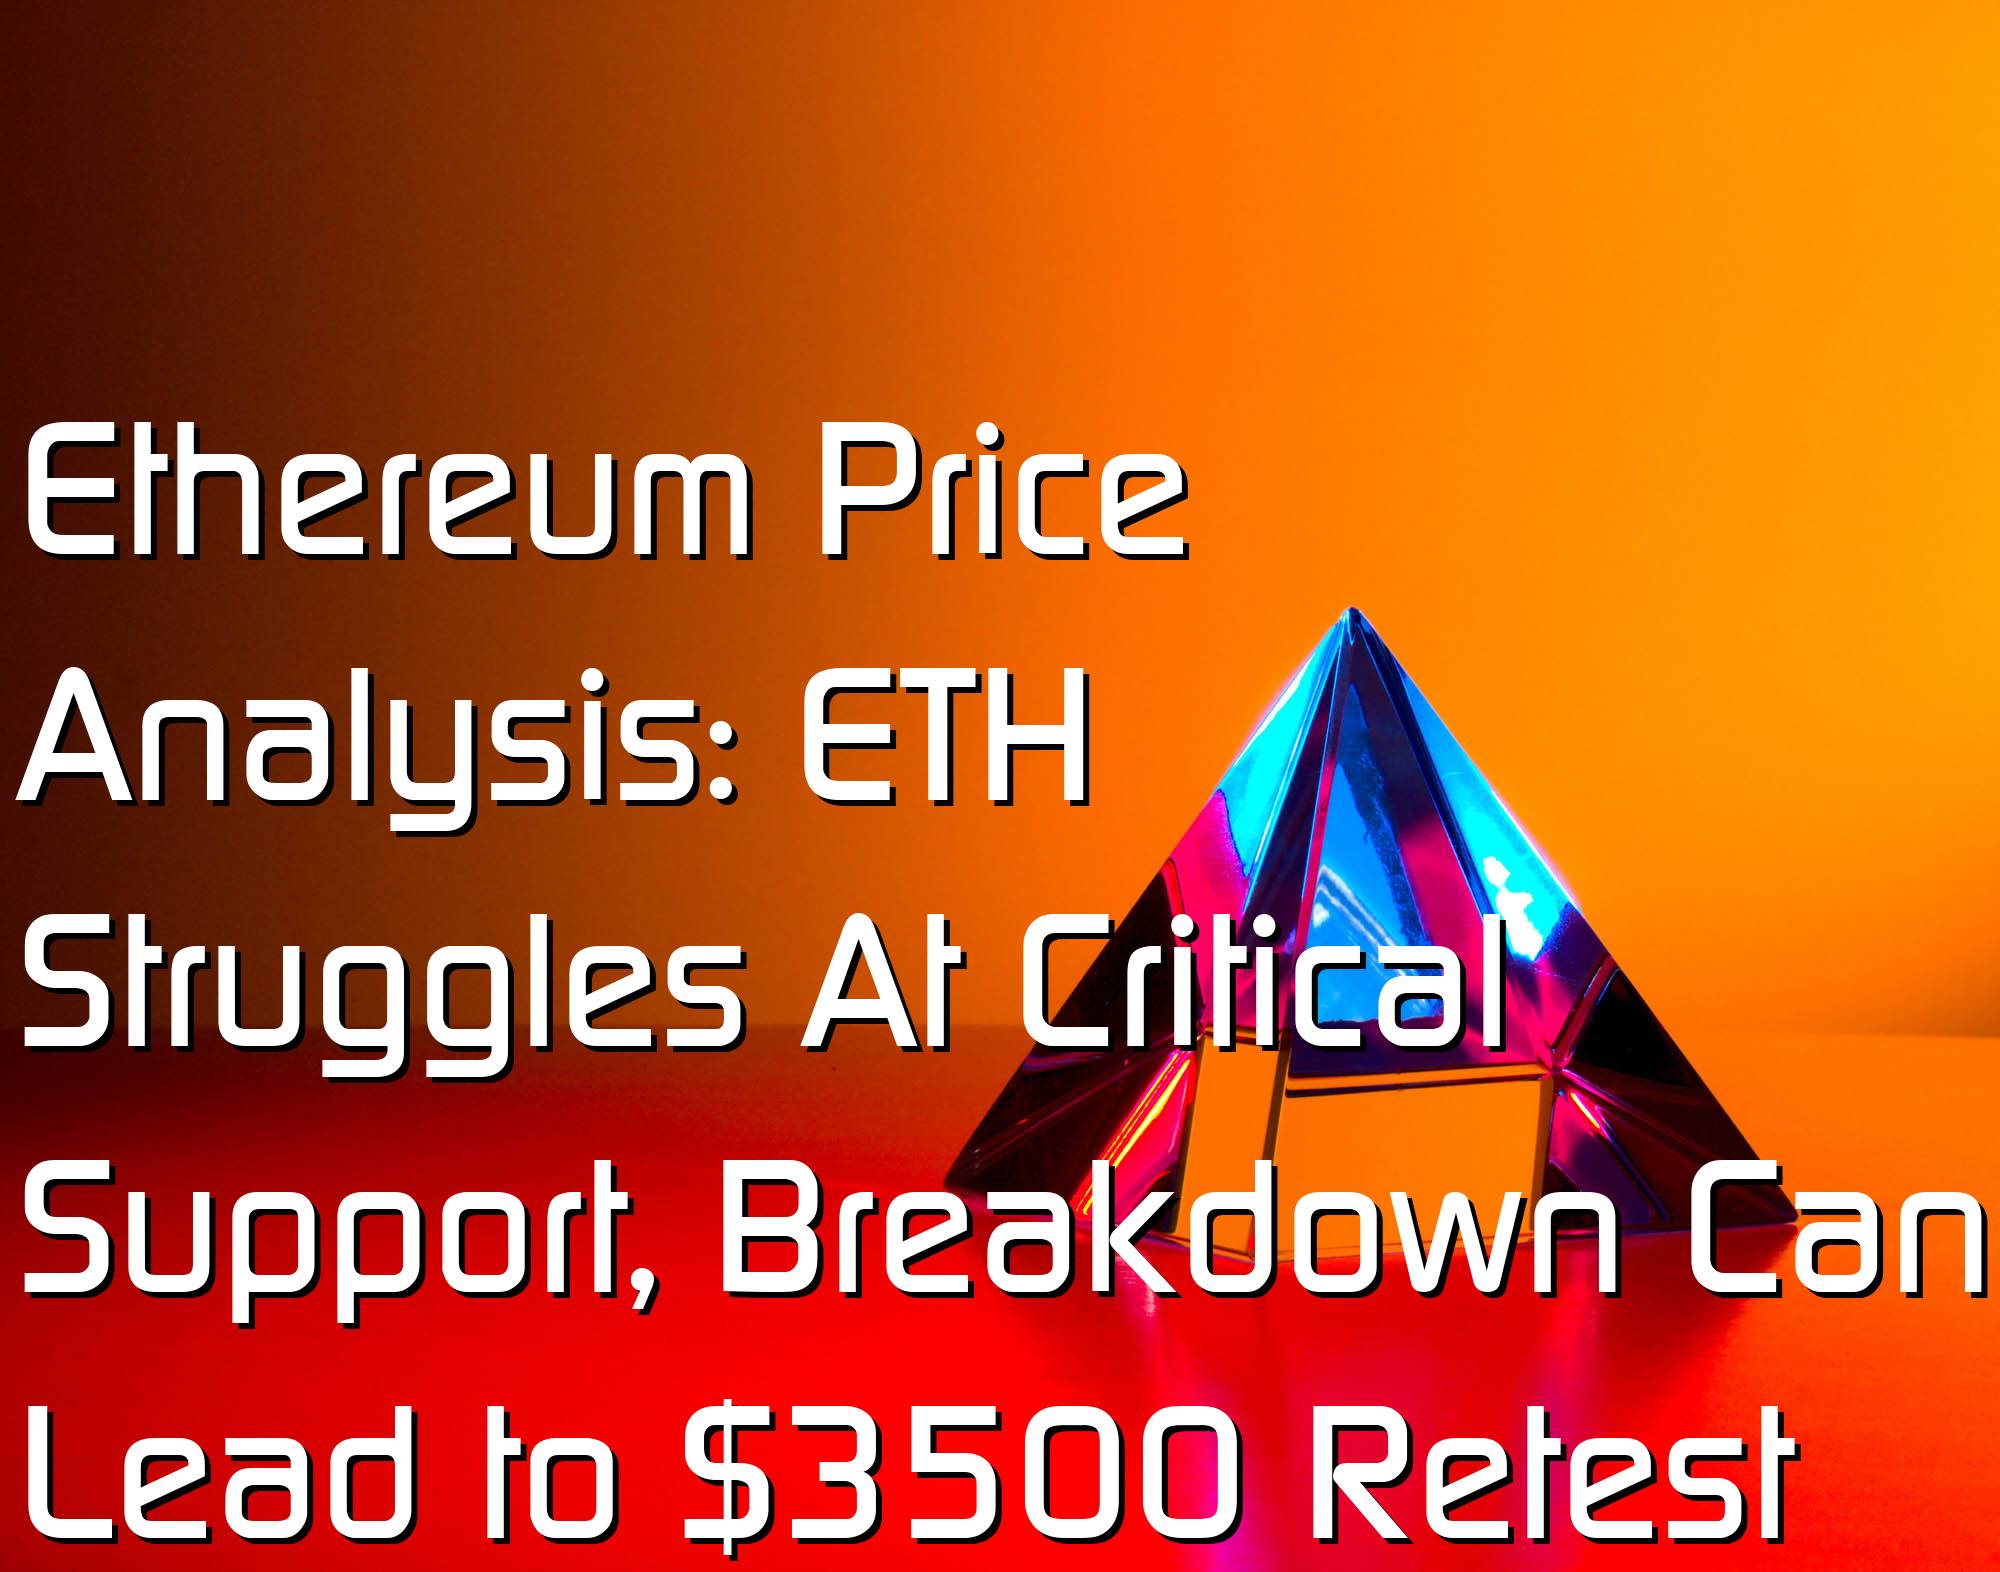 @$60249: Ethereum Price Analysis: ETH Struggles At Critical Support, Breakdown Can Lead to $3500 Retest